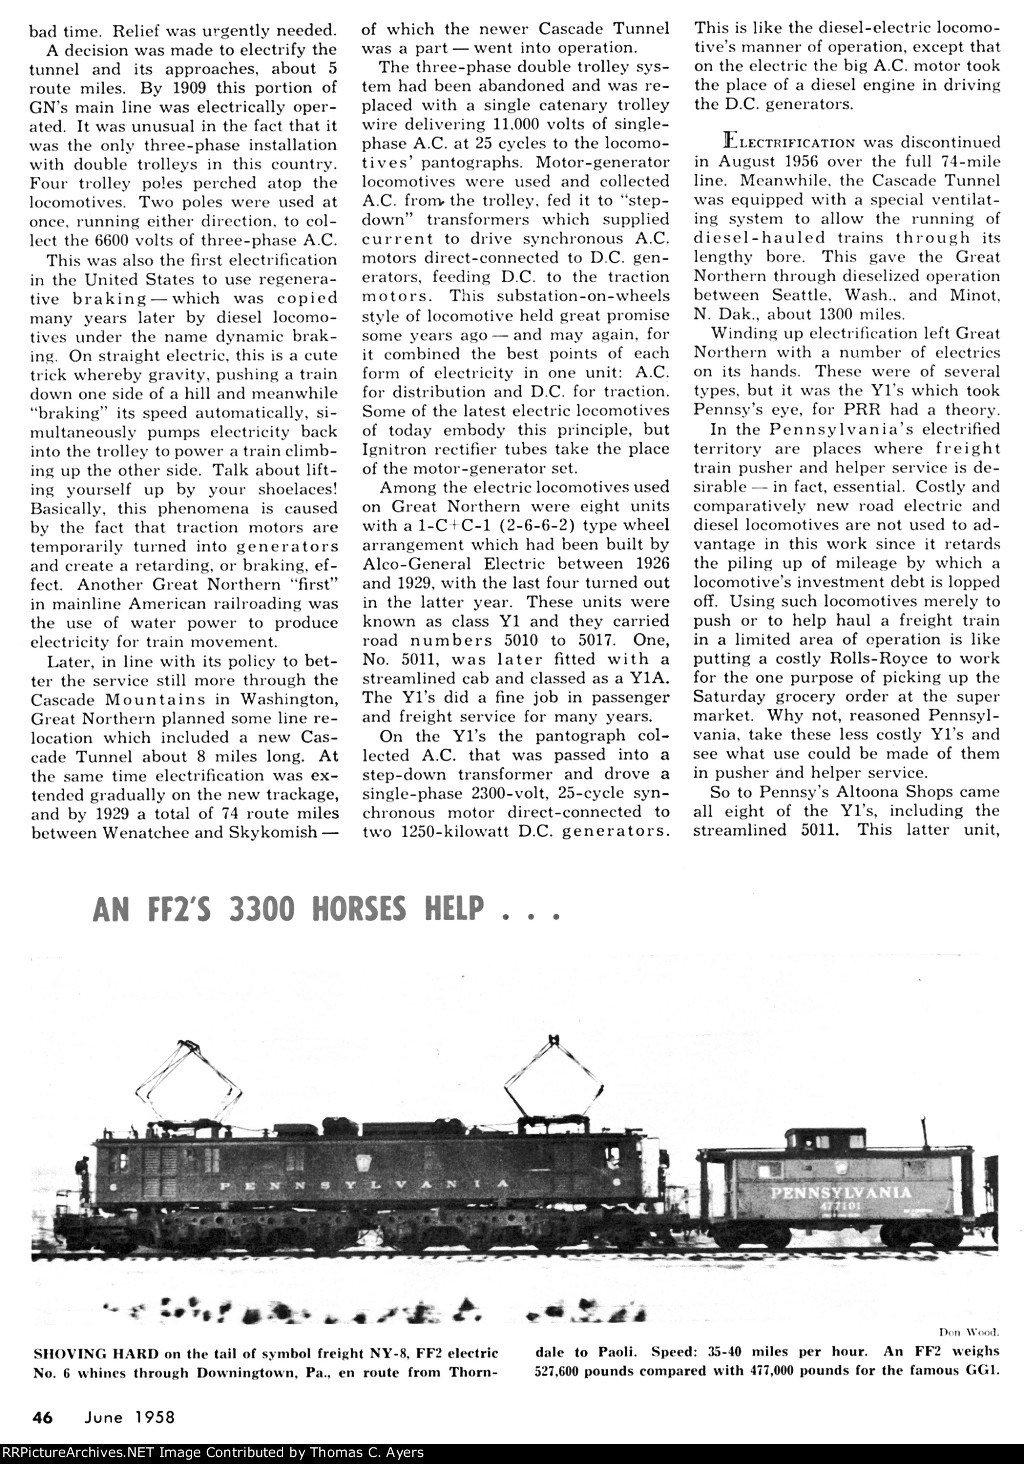 Pennsys "New" FF-2 Electrics, Page 46, 1958